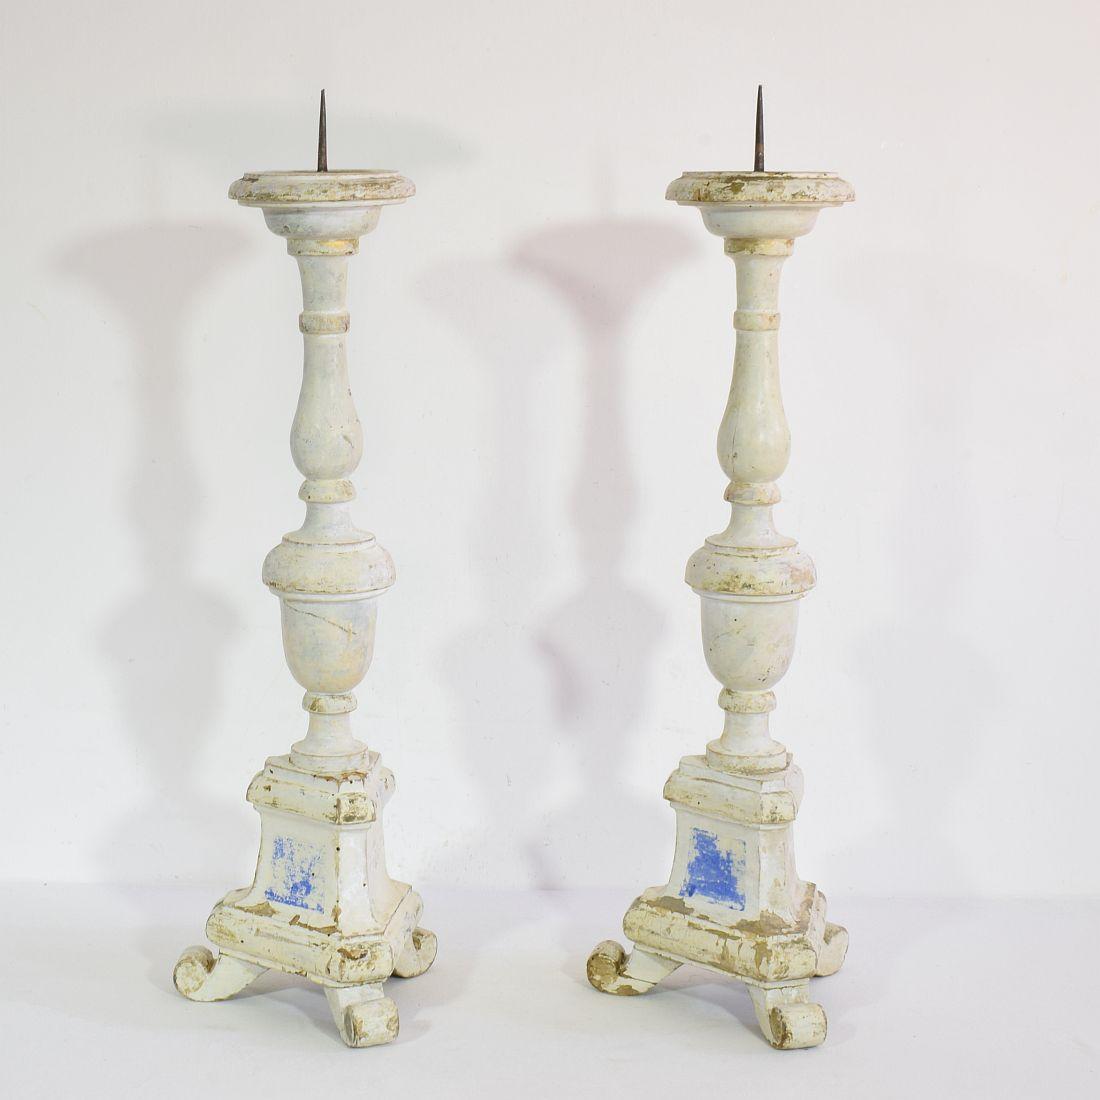 Neoclassical Revival Couple of 19th Century Italian Carved Wooden Candleholders in Neoclassical Style For Sale